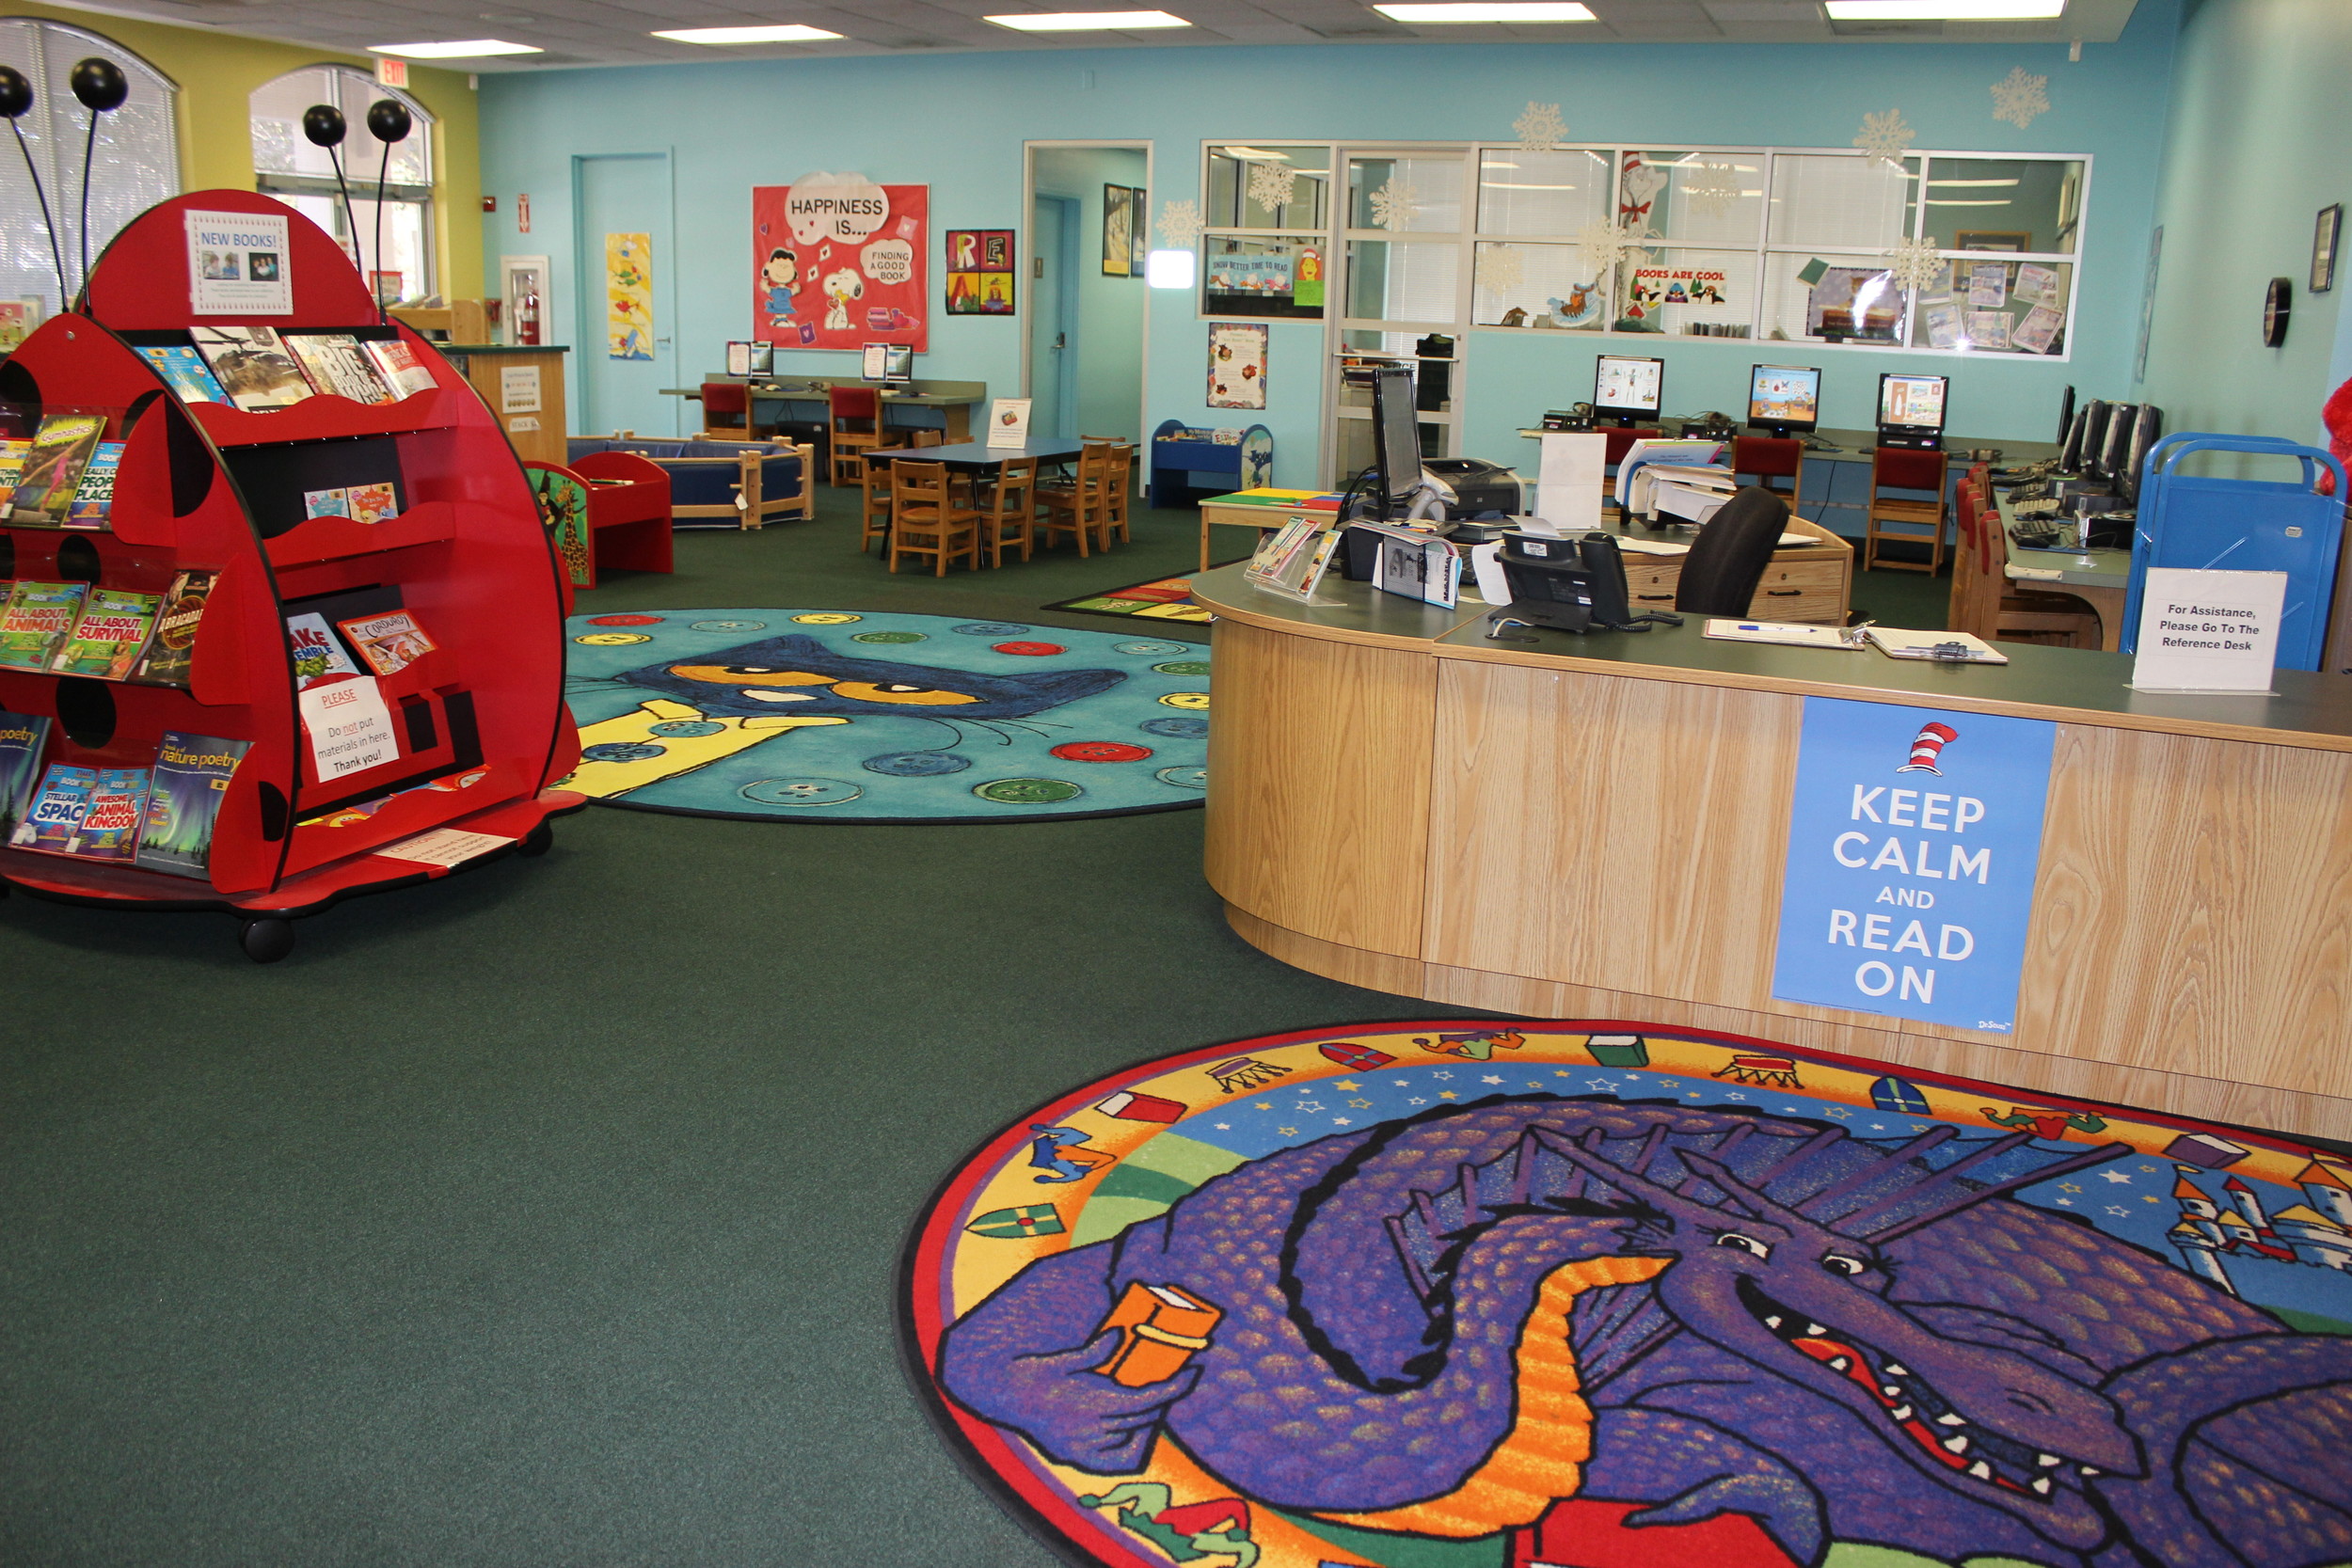 The children’s area has been updated with fresh coats of paint and a large Pete the Cat character rug. The bean bag chairs will be replaced with plastic chairs and tables.